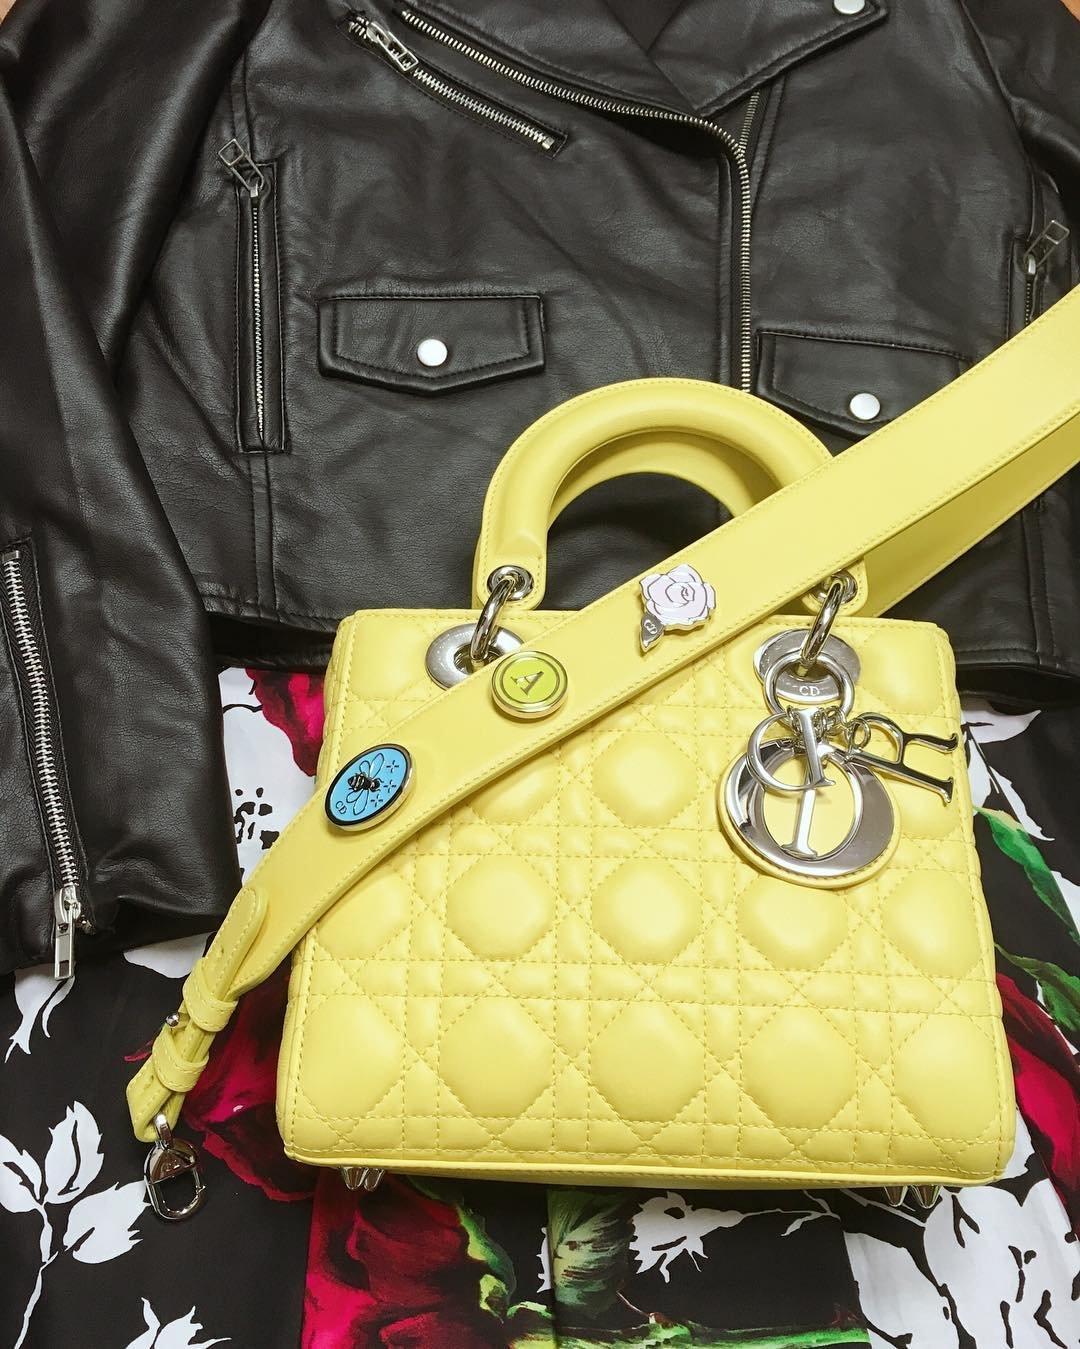 a-closer-look-my-lady-dior-bag-and-lucky-badges-8